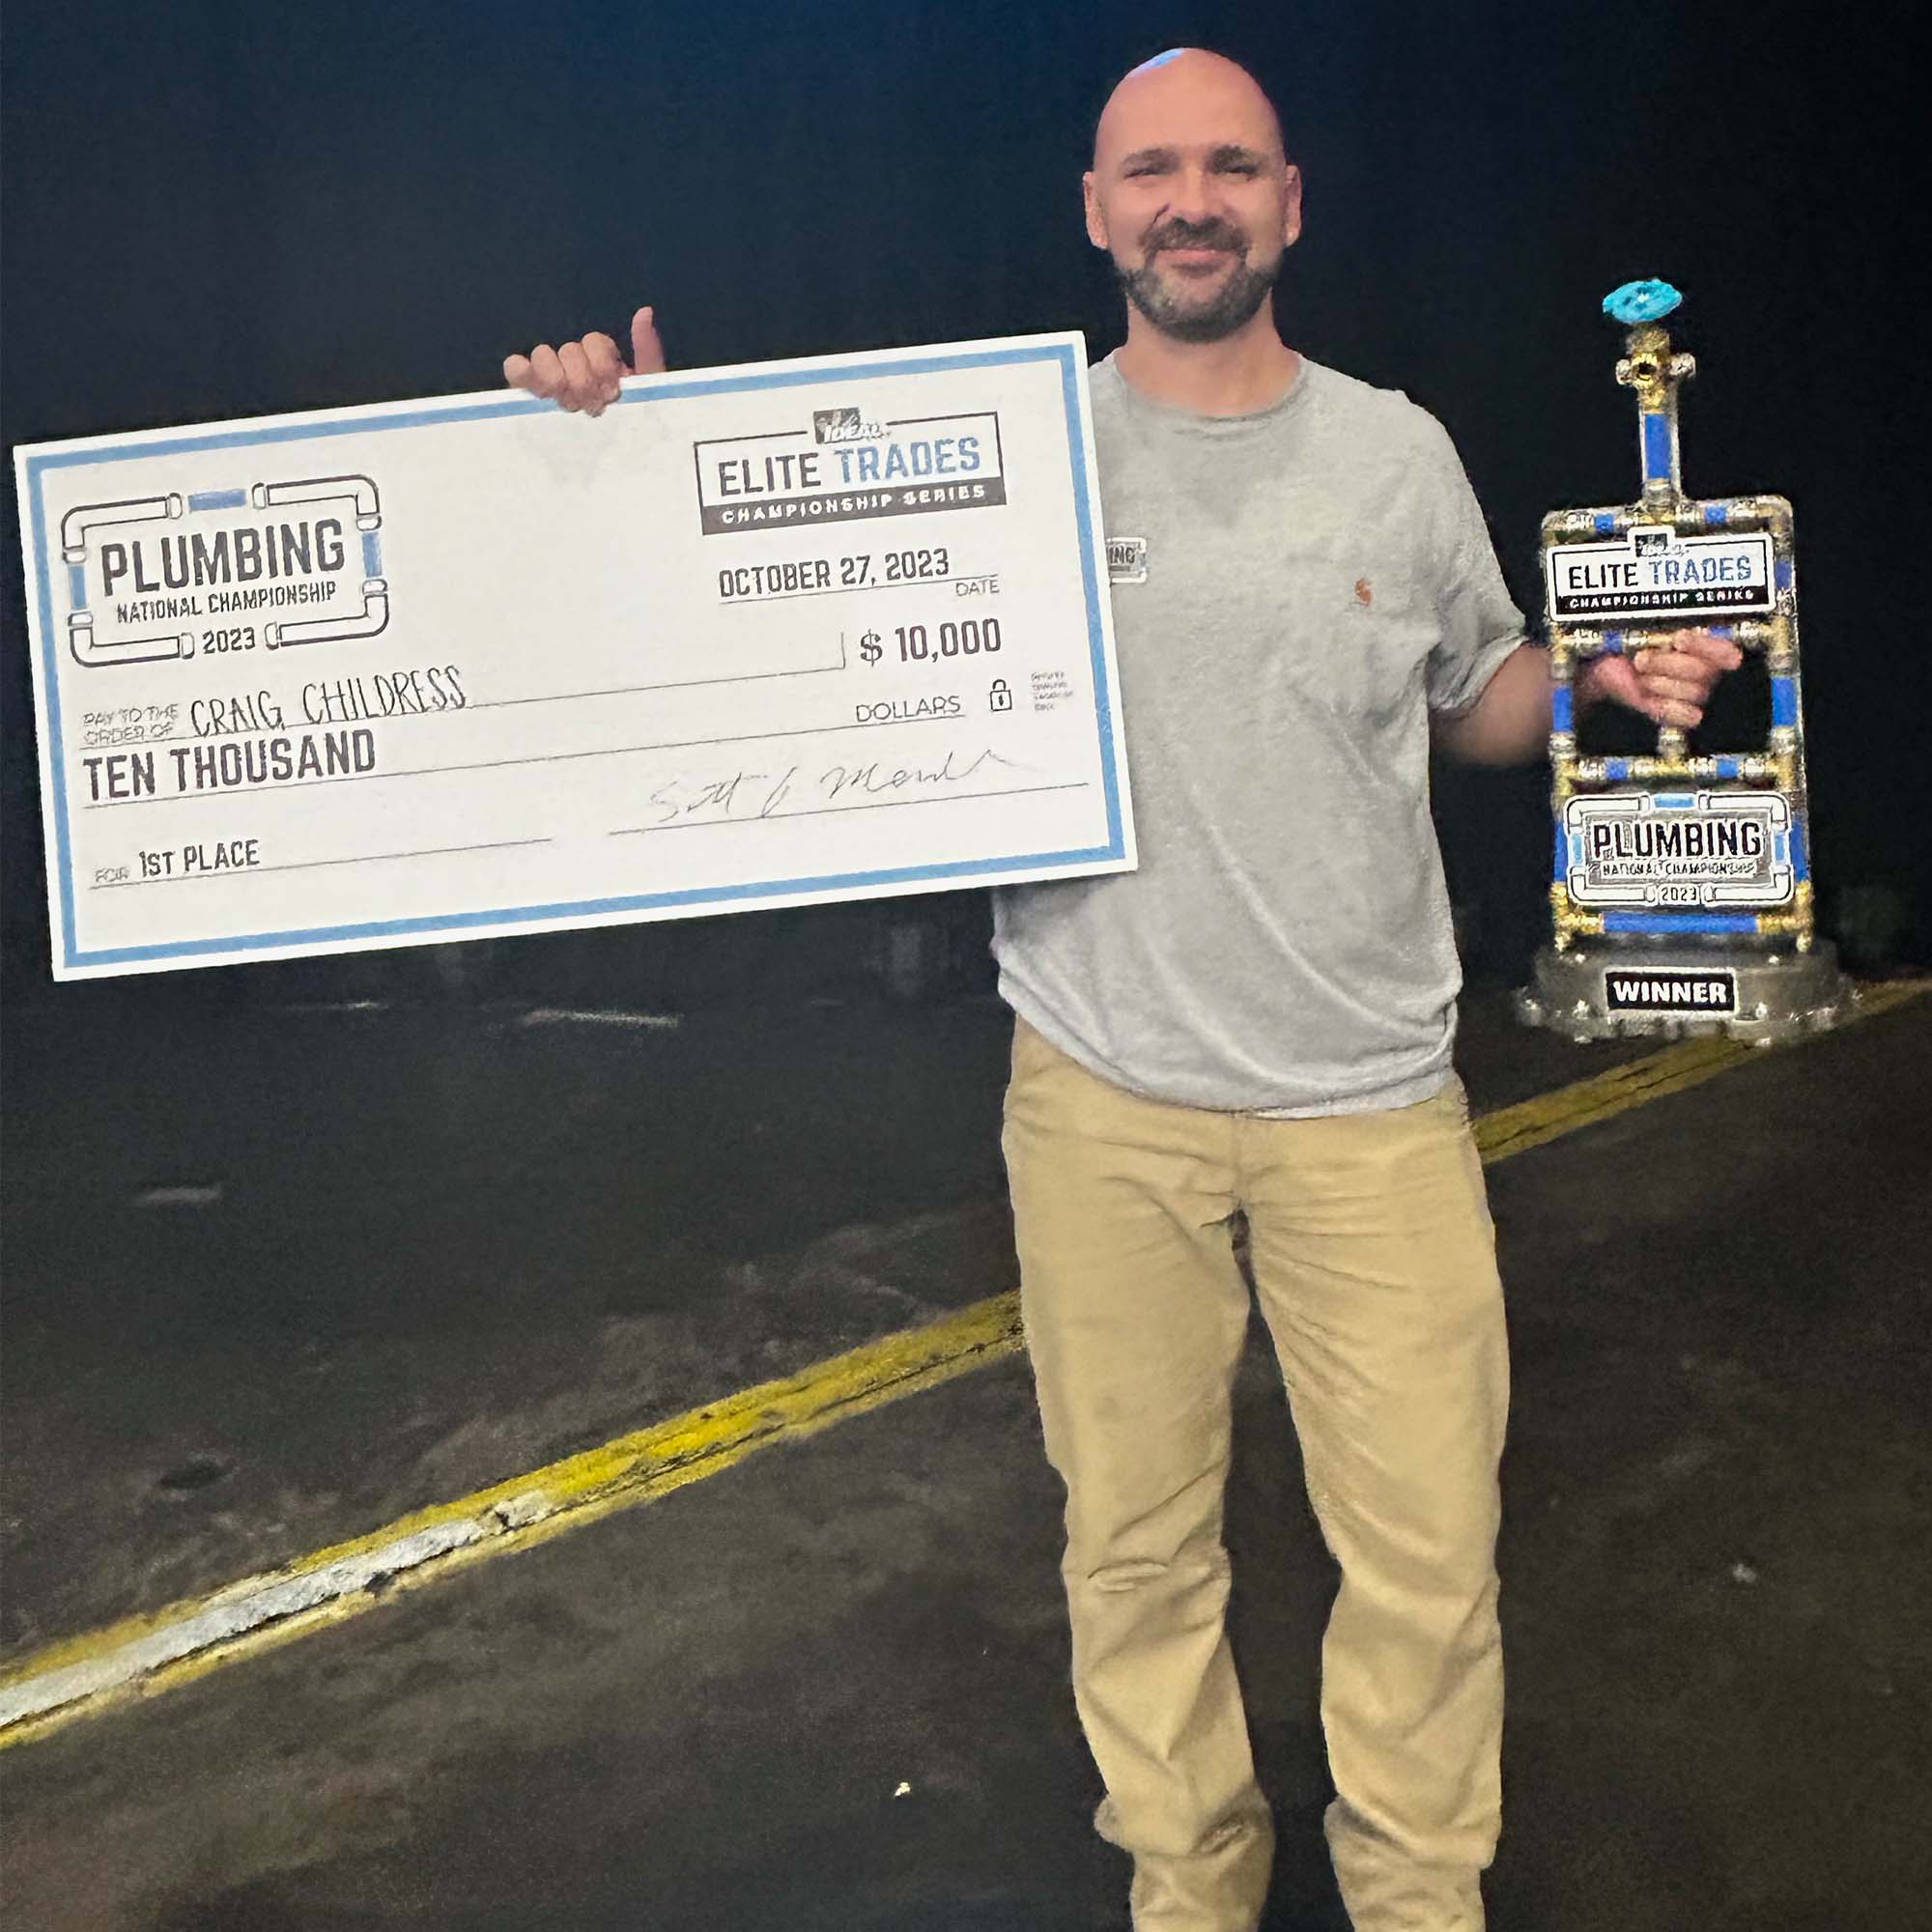 Photo: Craig Childress, a white bald man wearing a grey shirt and khaki pants holds a silver trophy in his right hand and a large check for $10,000 in his left. He smiles and poses for the photo.